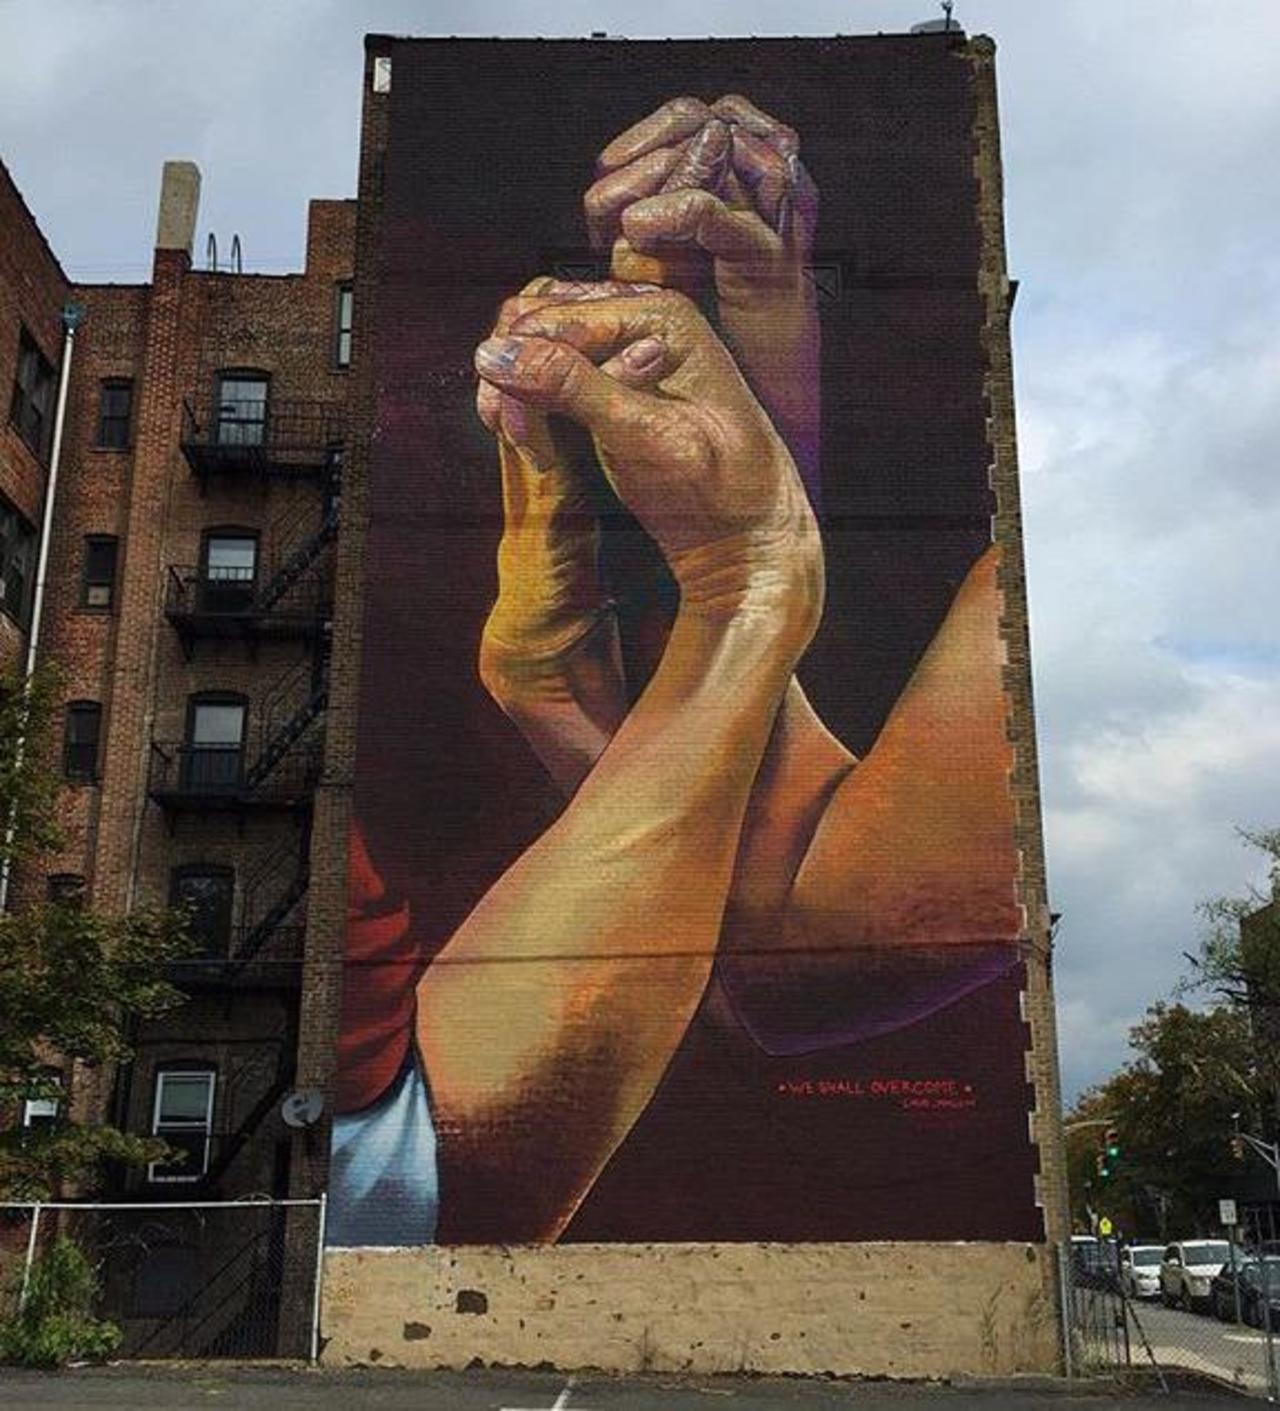 New Street Art by CaseMaclaim in Jersey City for the TheBKcollective 

#art #graffiti #mural #streetart http://t.co/81qhJefSsw